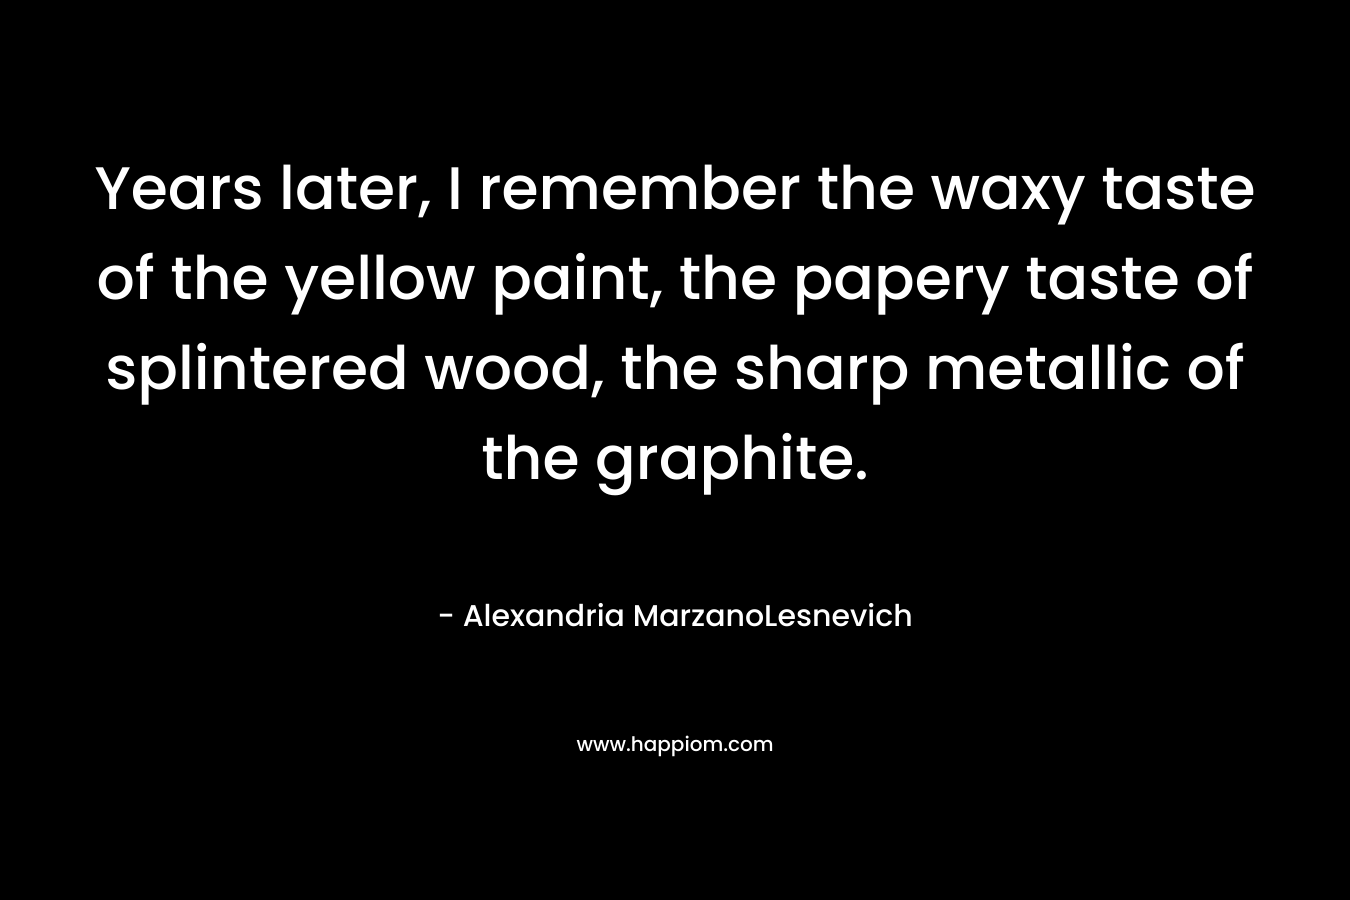 Years later, I remember the waxy taste of the yellow paint, the papery taste of splintered wood, the sharp metallic of the graphite.